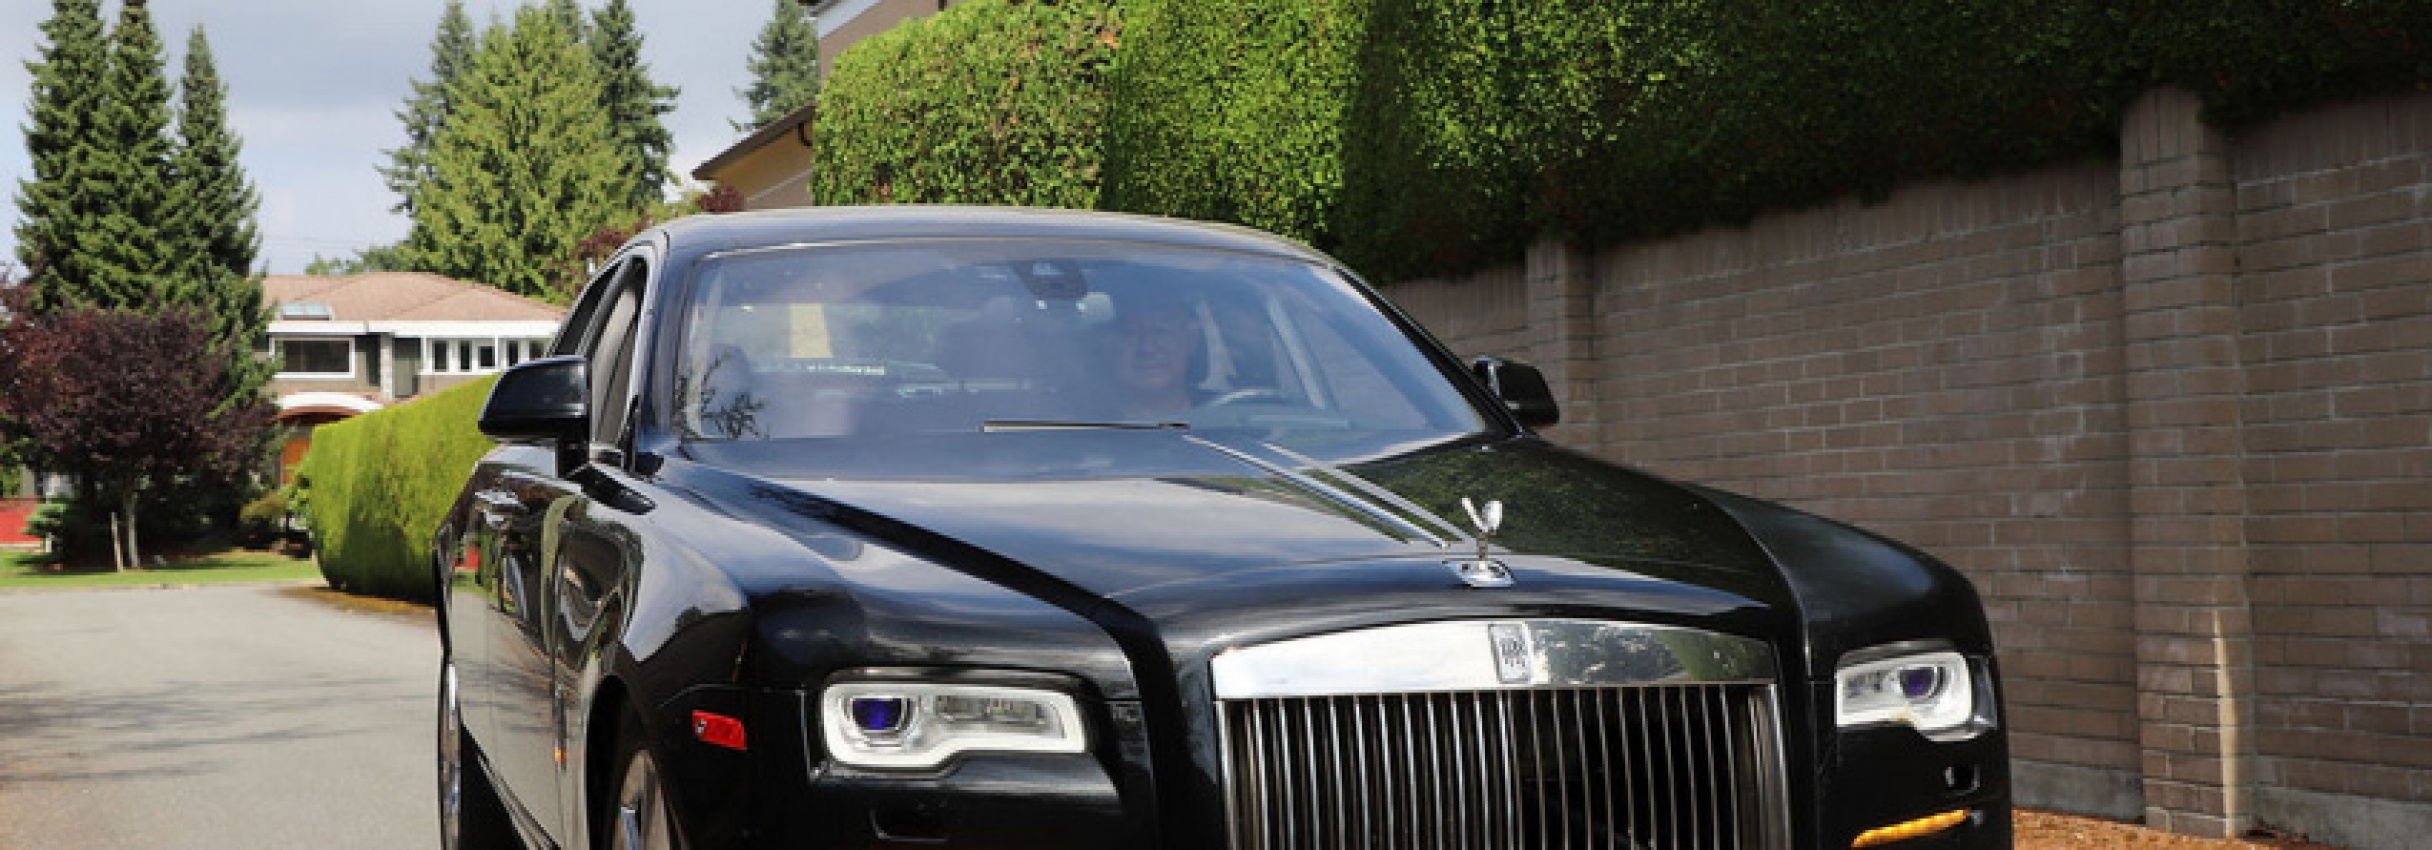 autos, cars, news, rolls-royce, electric vehicles, electromod, rolls royce videos, rolls royce wraith, tuning, video, canadian businessman sells house to fund his own rolls-royce wraith electromod project